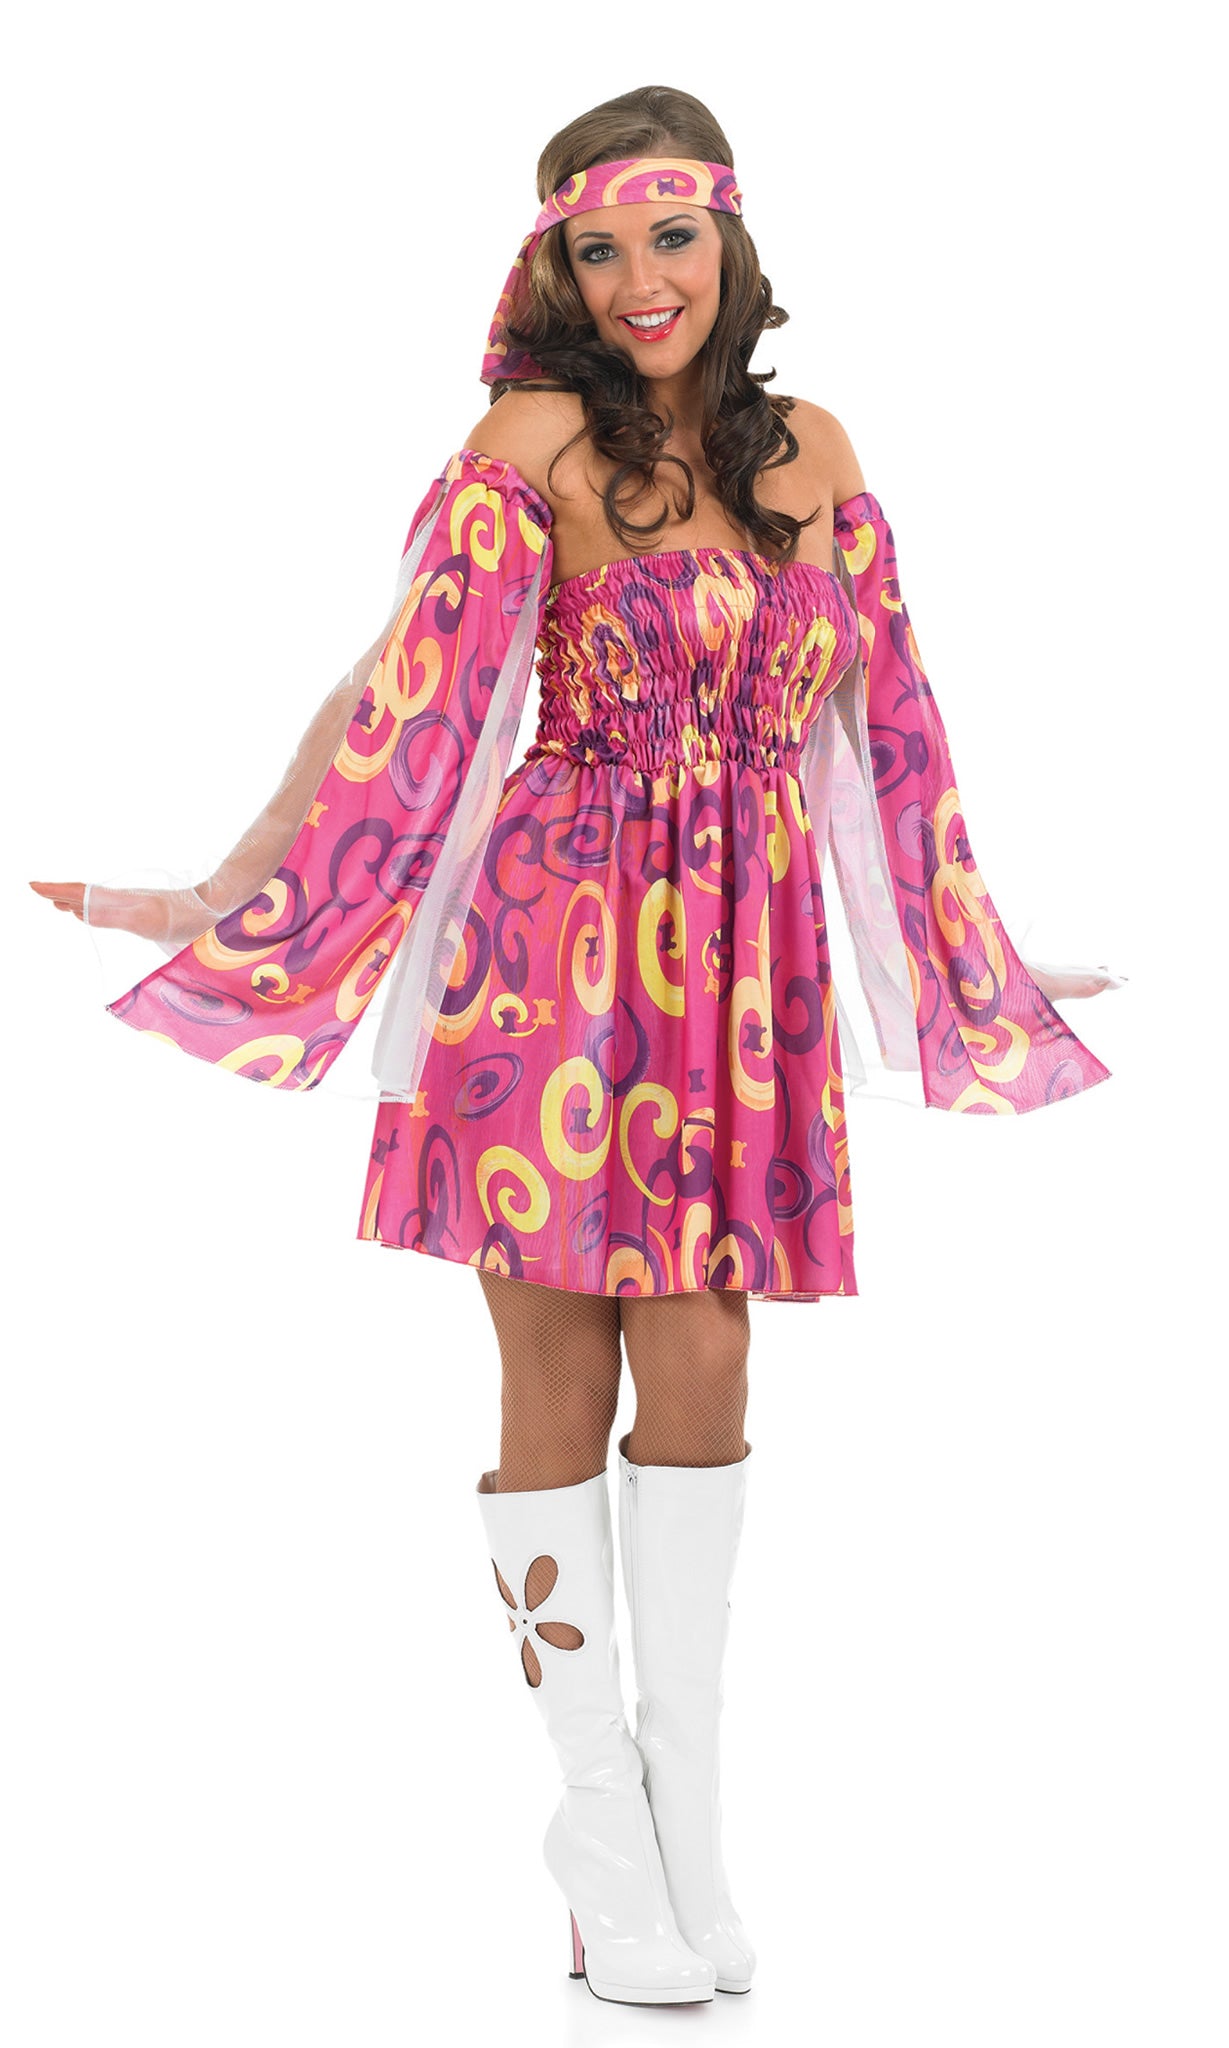 1960s pink and yellow swirl dress with matching headband and arm sleeves